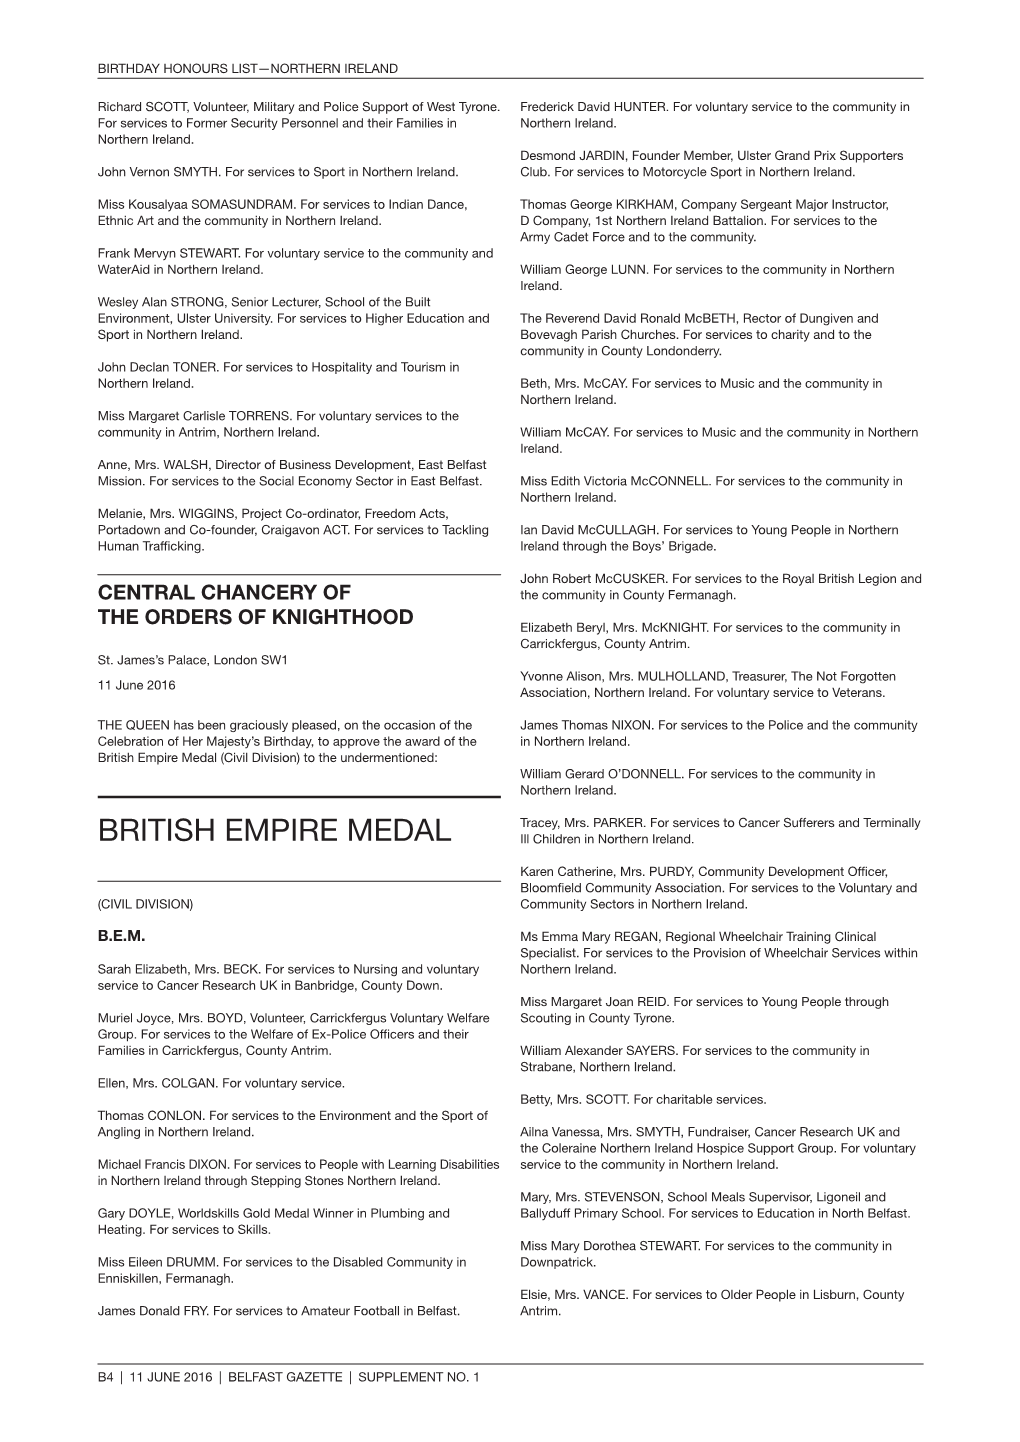 British Empire Medal (Civil Division) to the Undermentioned: William Gerard O’DONNELL